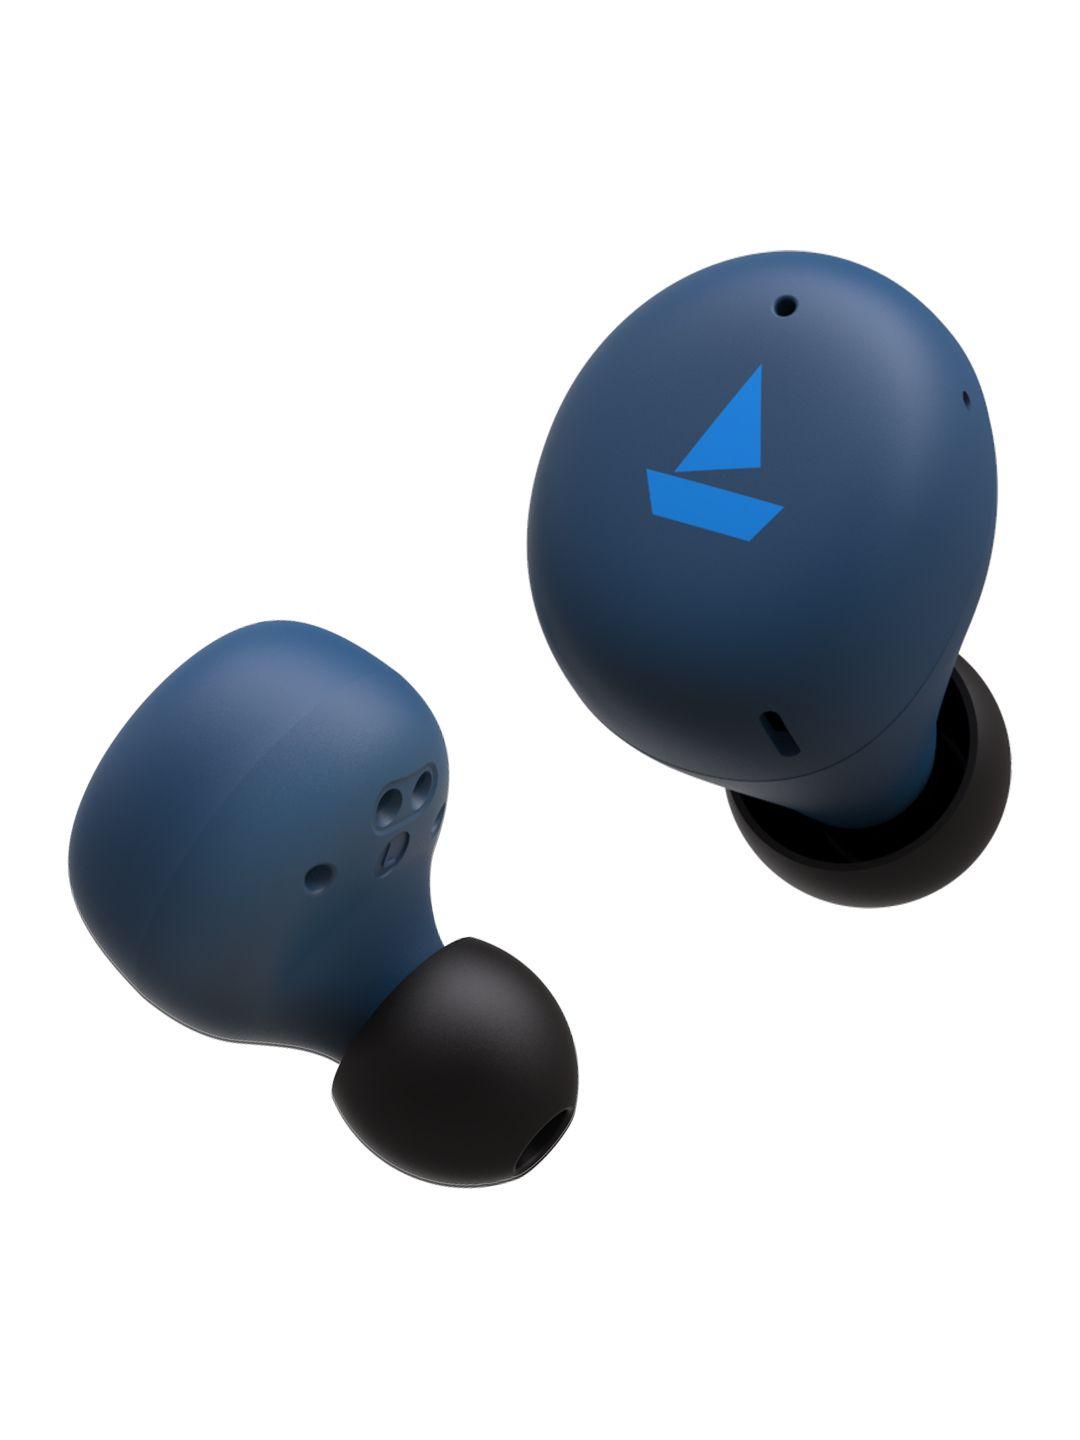 boat blue airdopes 381 m tws earbuds with up to 20h playback